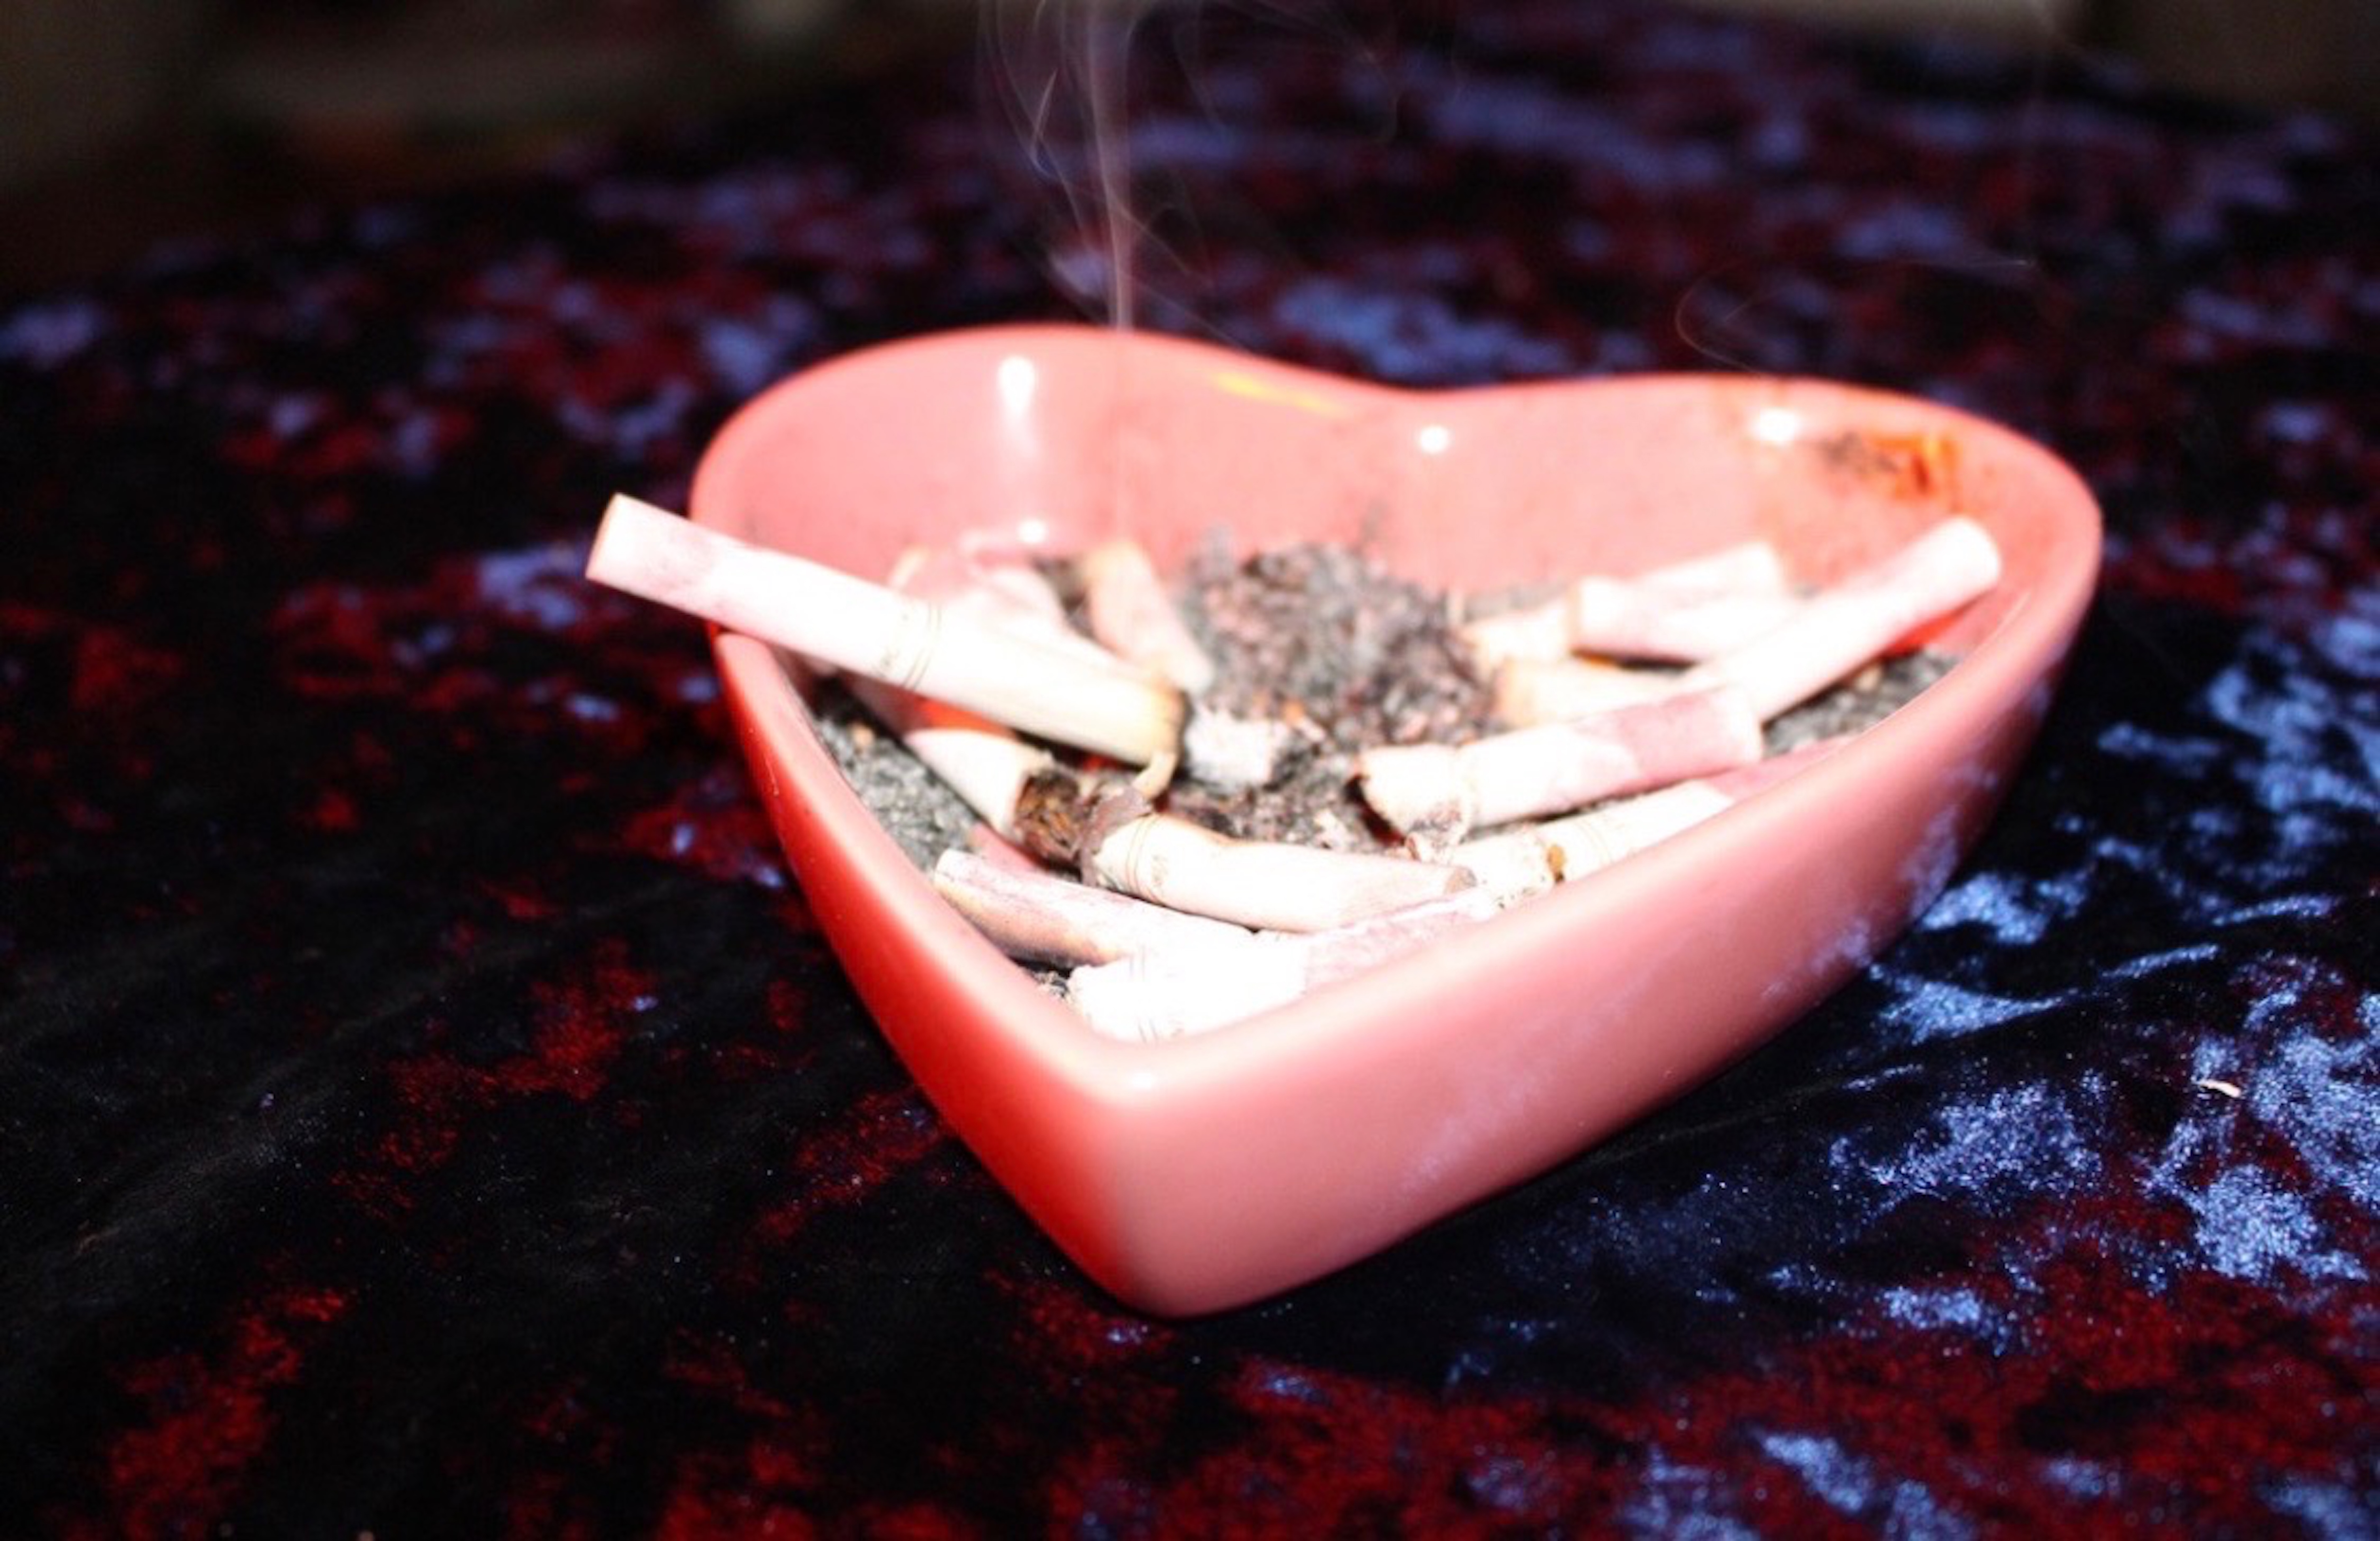 heart shape ash tray with cigarettes inside it